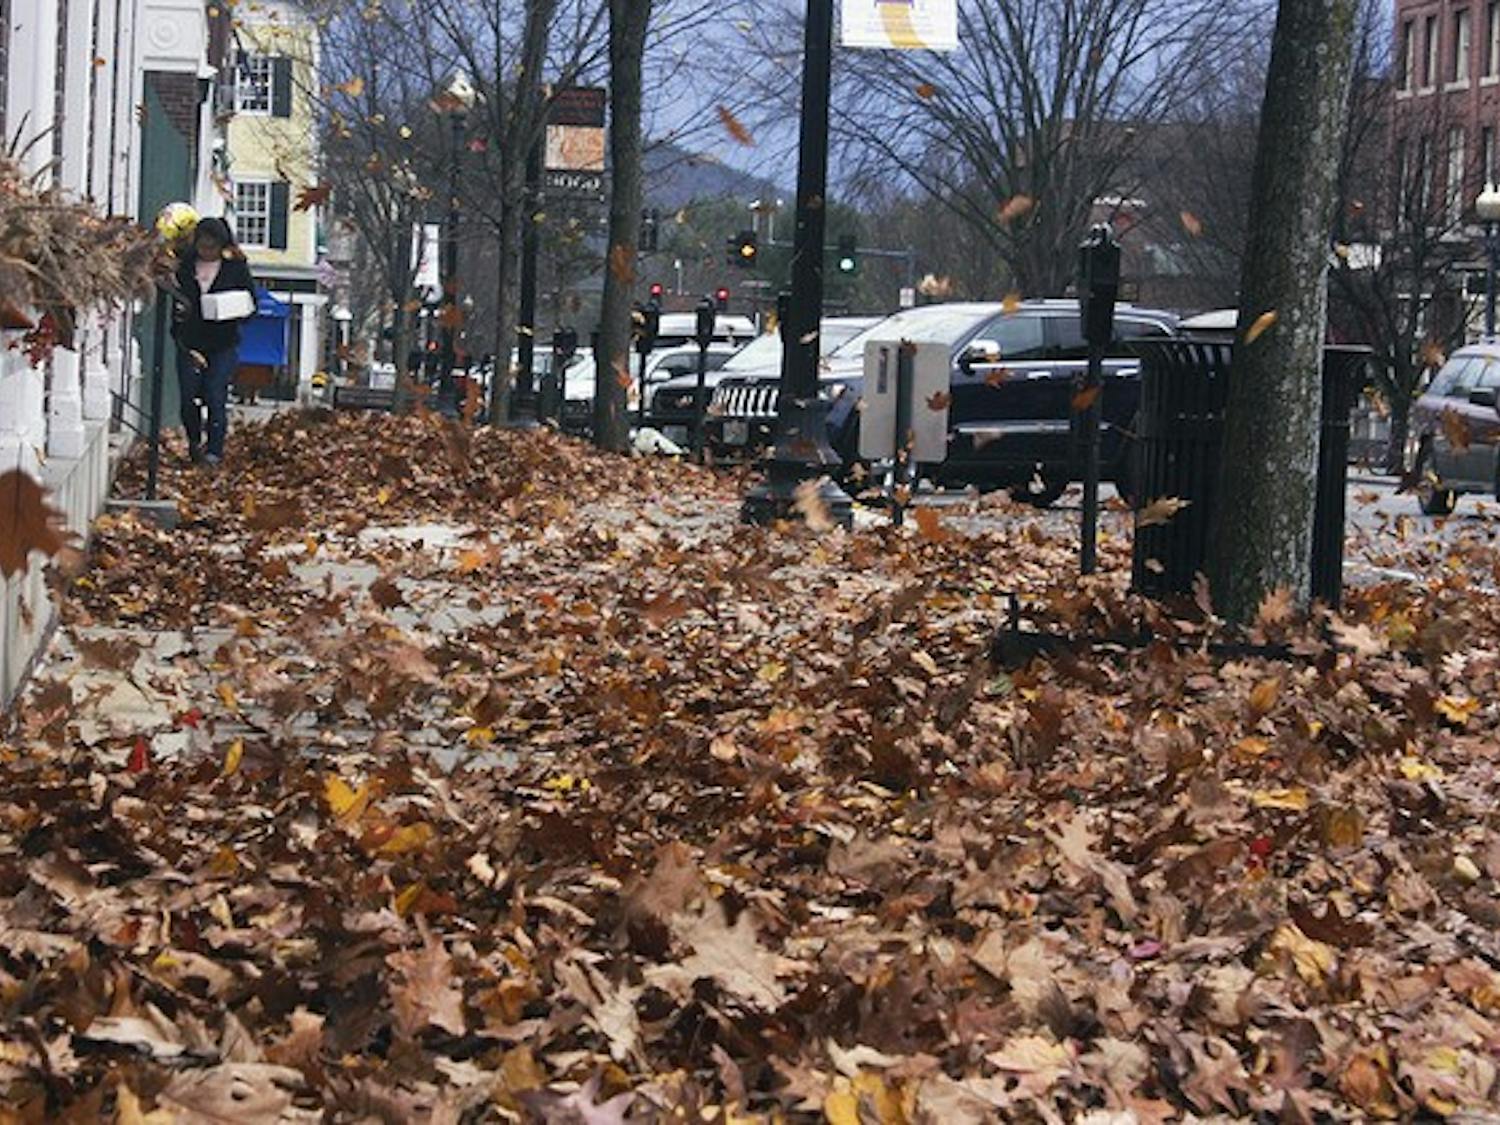 Hanover felt Hurricane Sandy's effects on Monday, with rain and heavy winds as the storm landed in New Jersey.